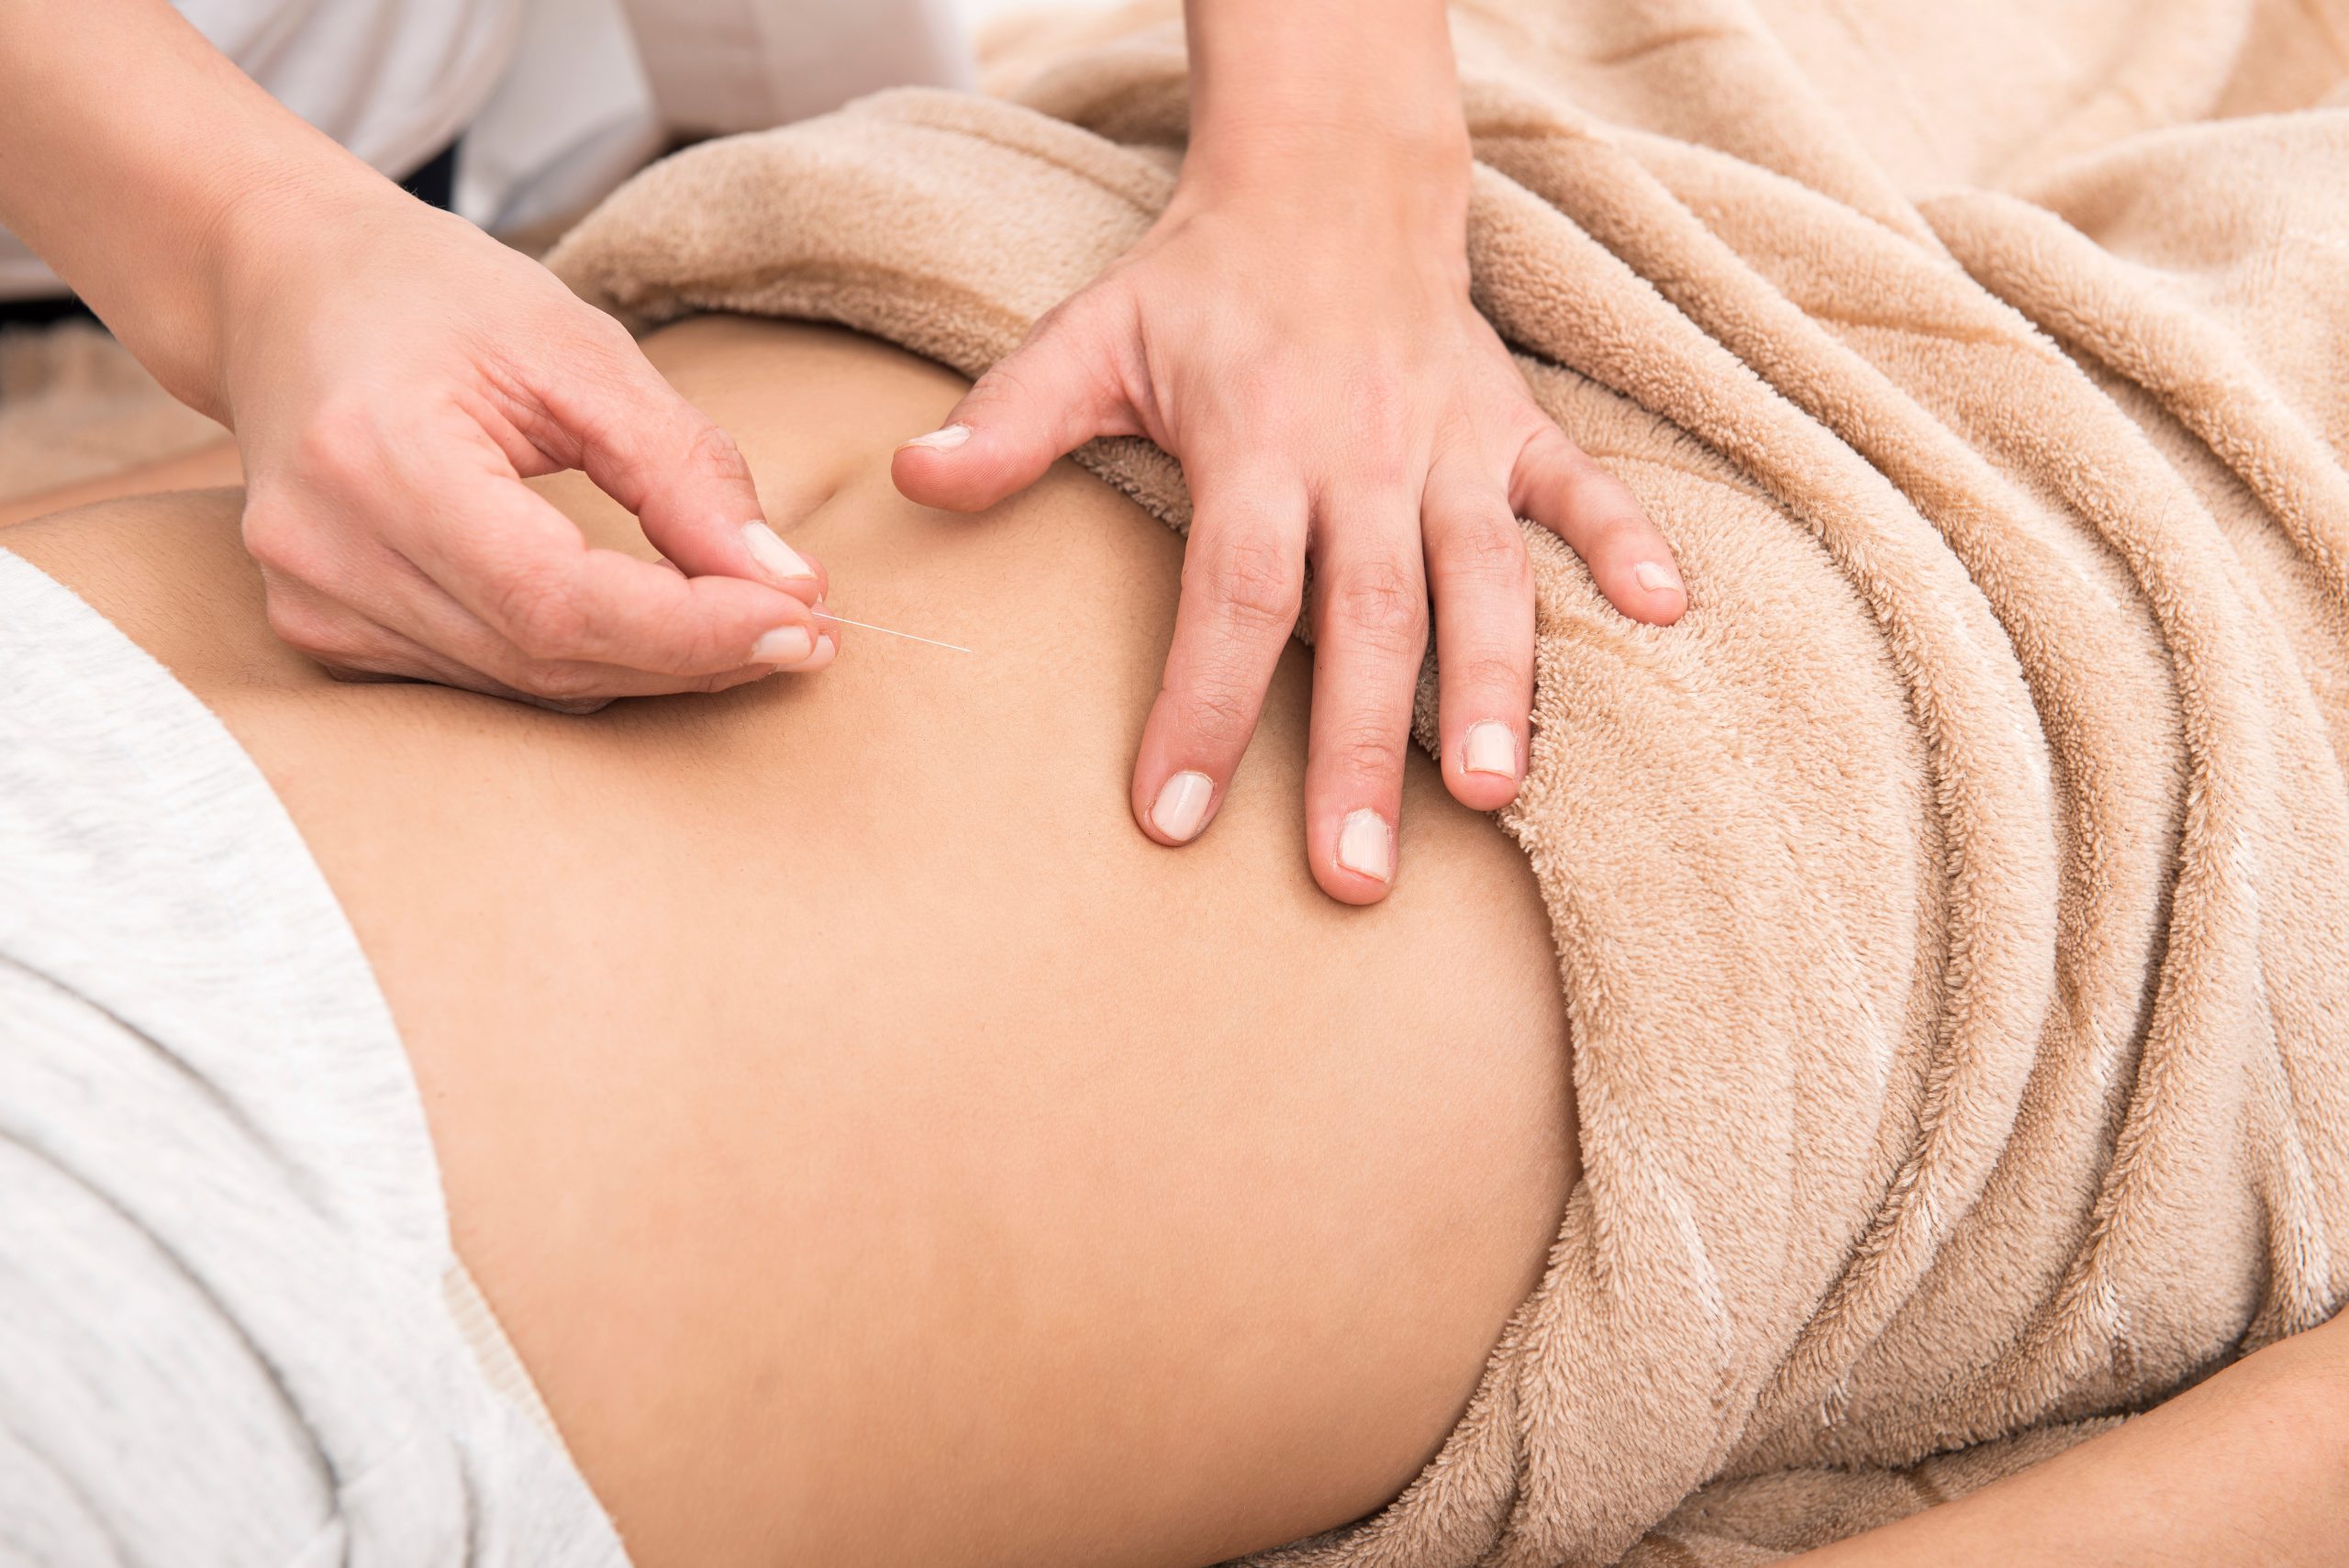 fertility acupuncture treatment on woman